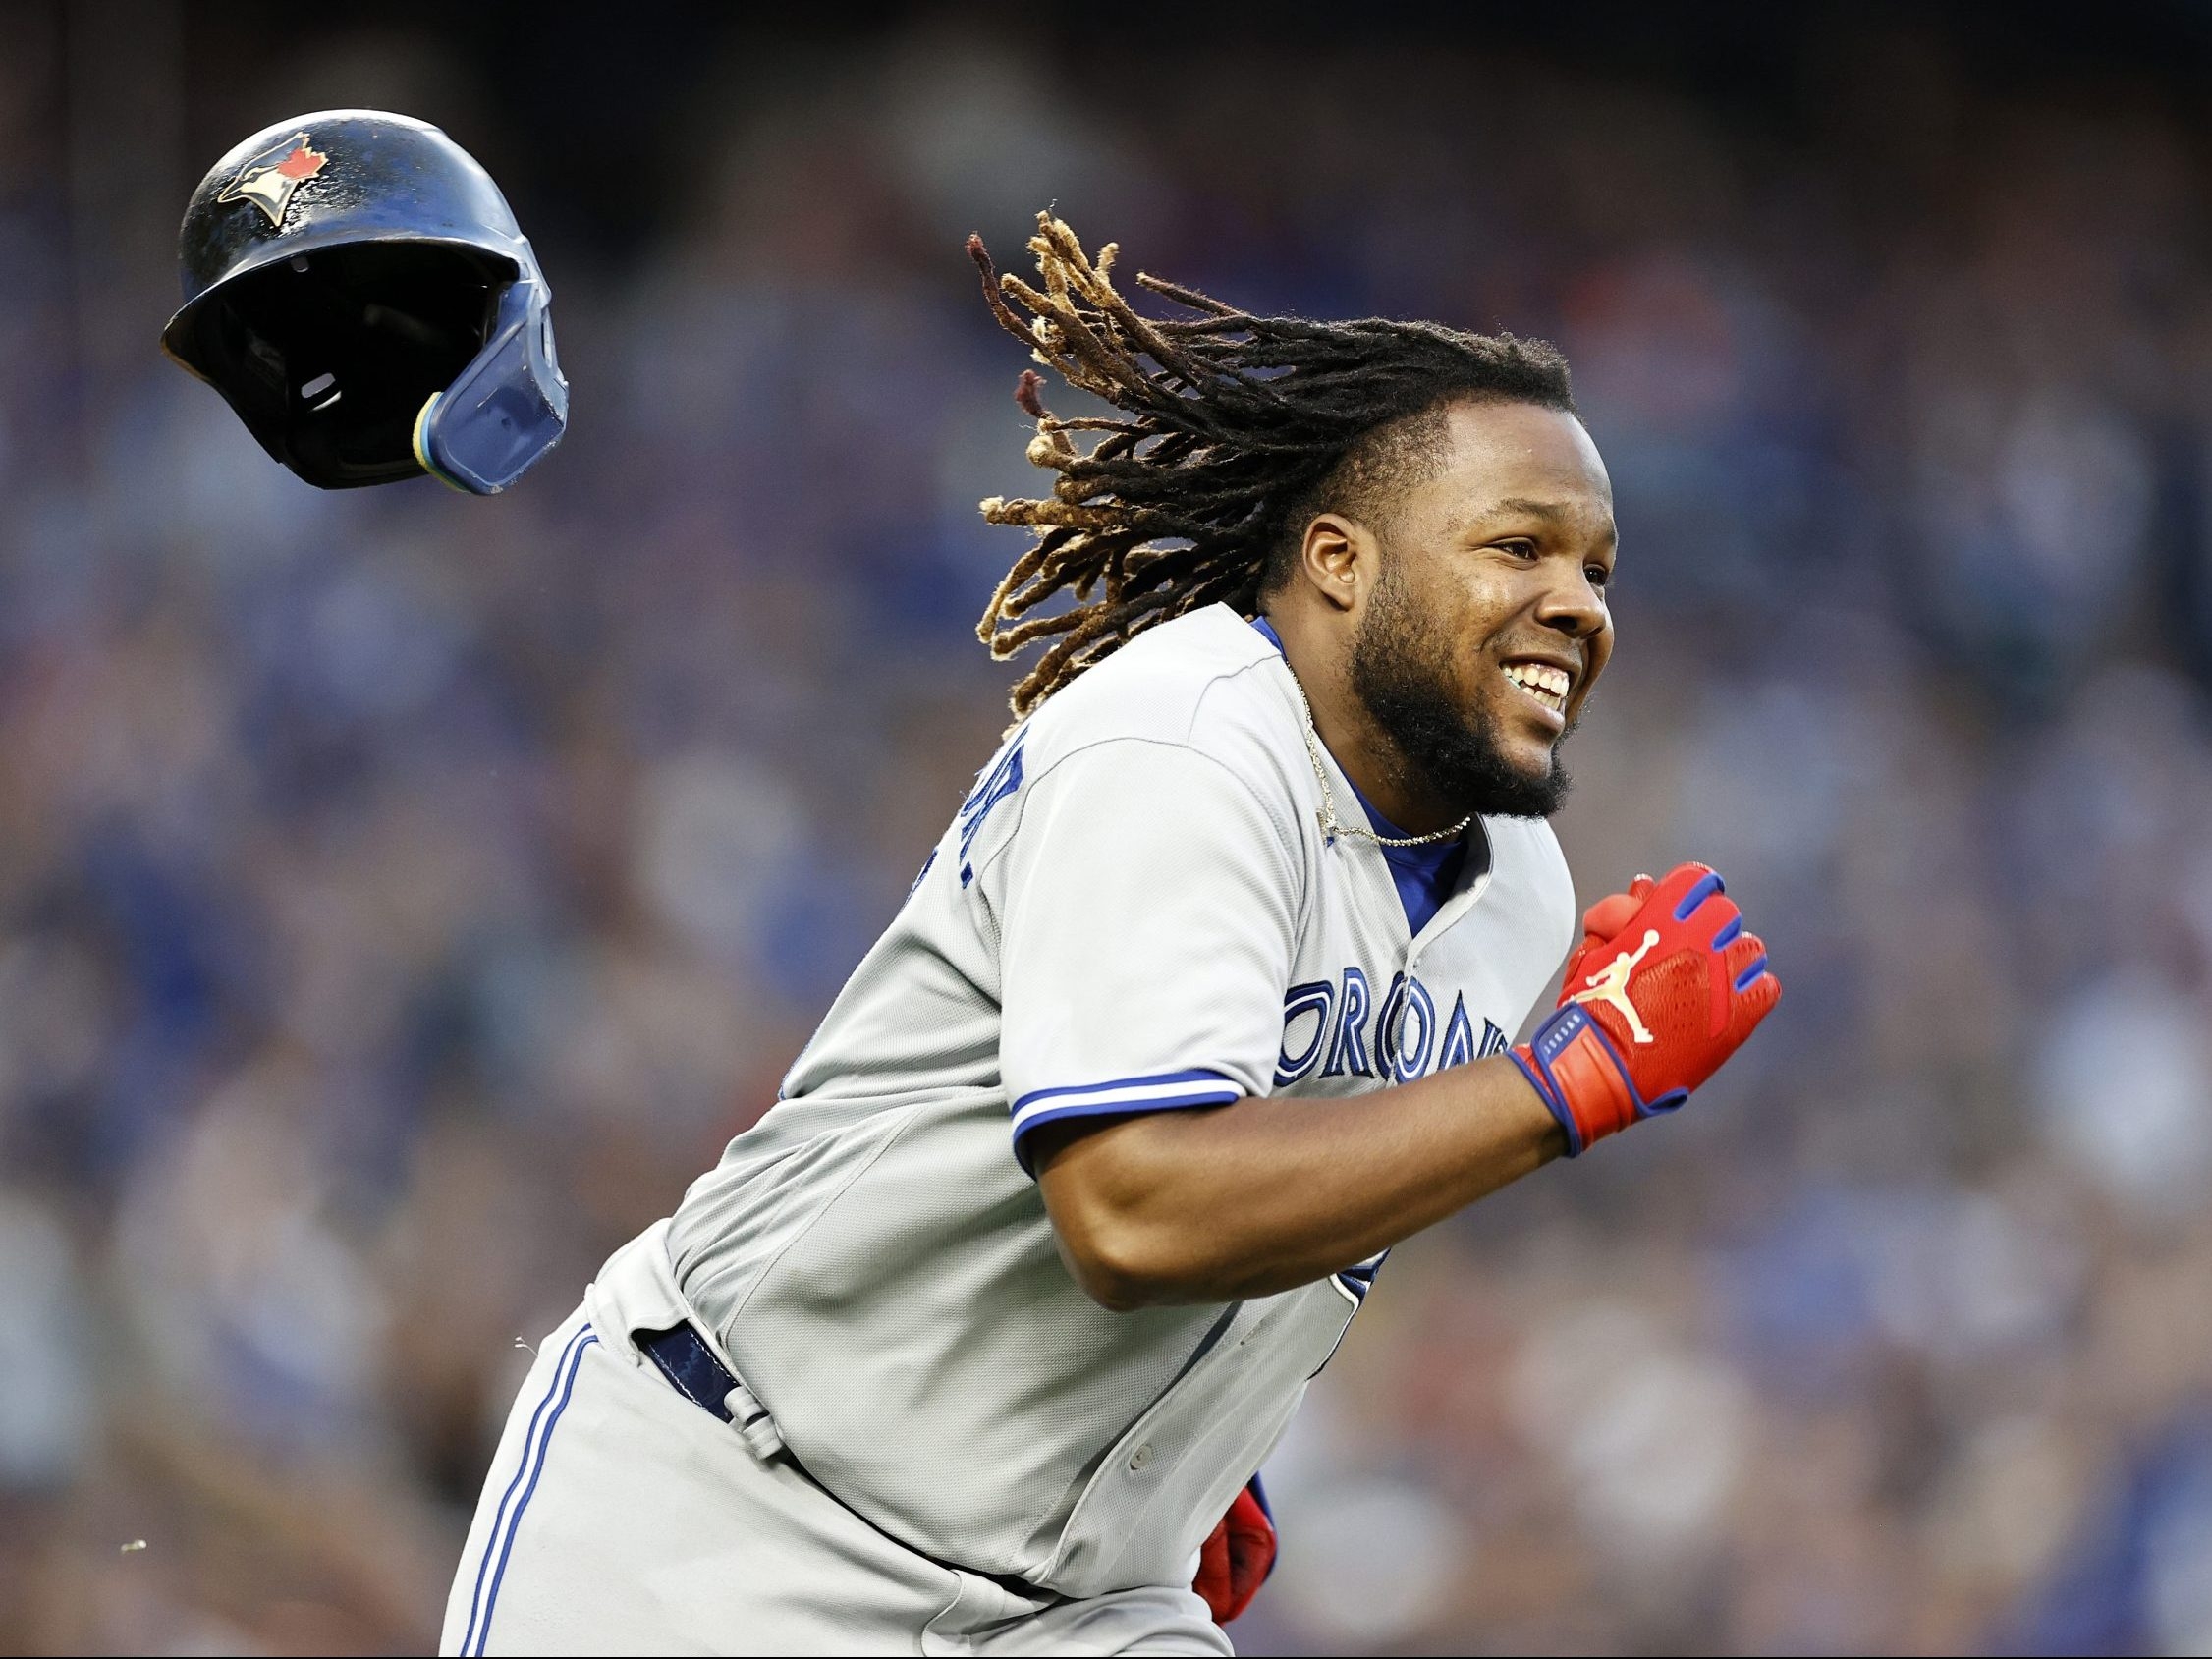 Blue Jays bats go silent as Seattle Mariners walk it off in 11th